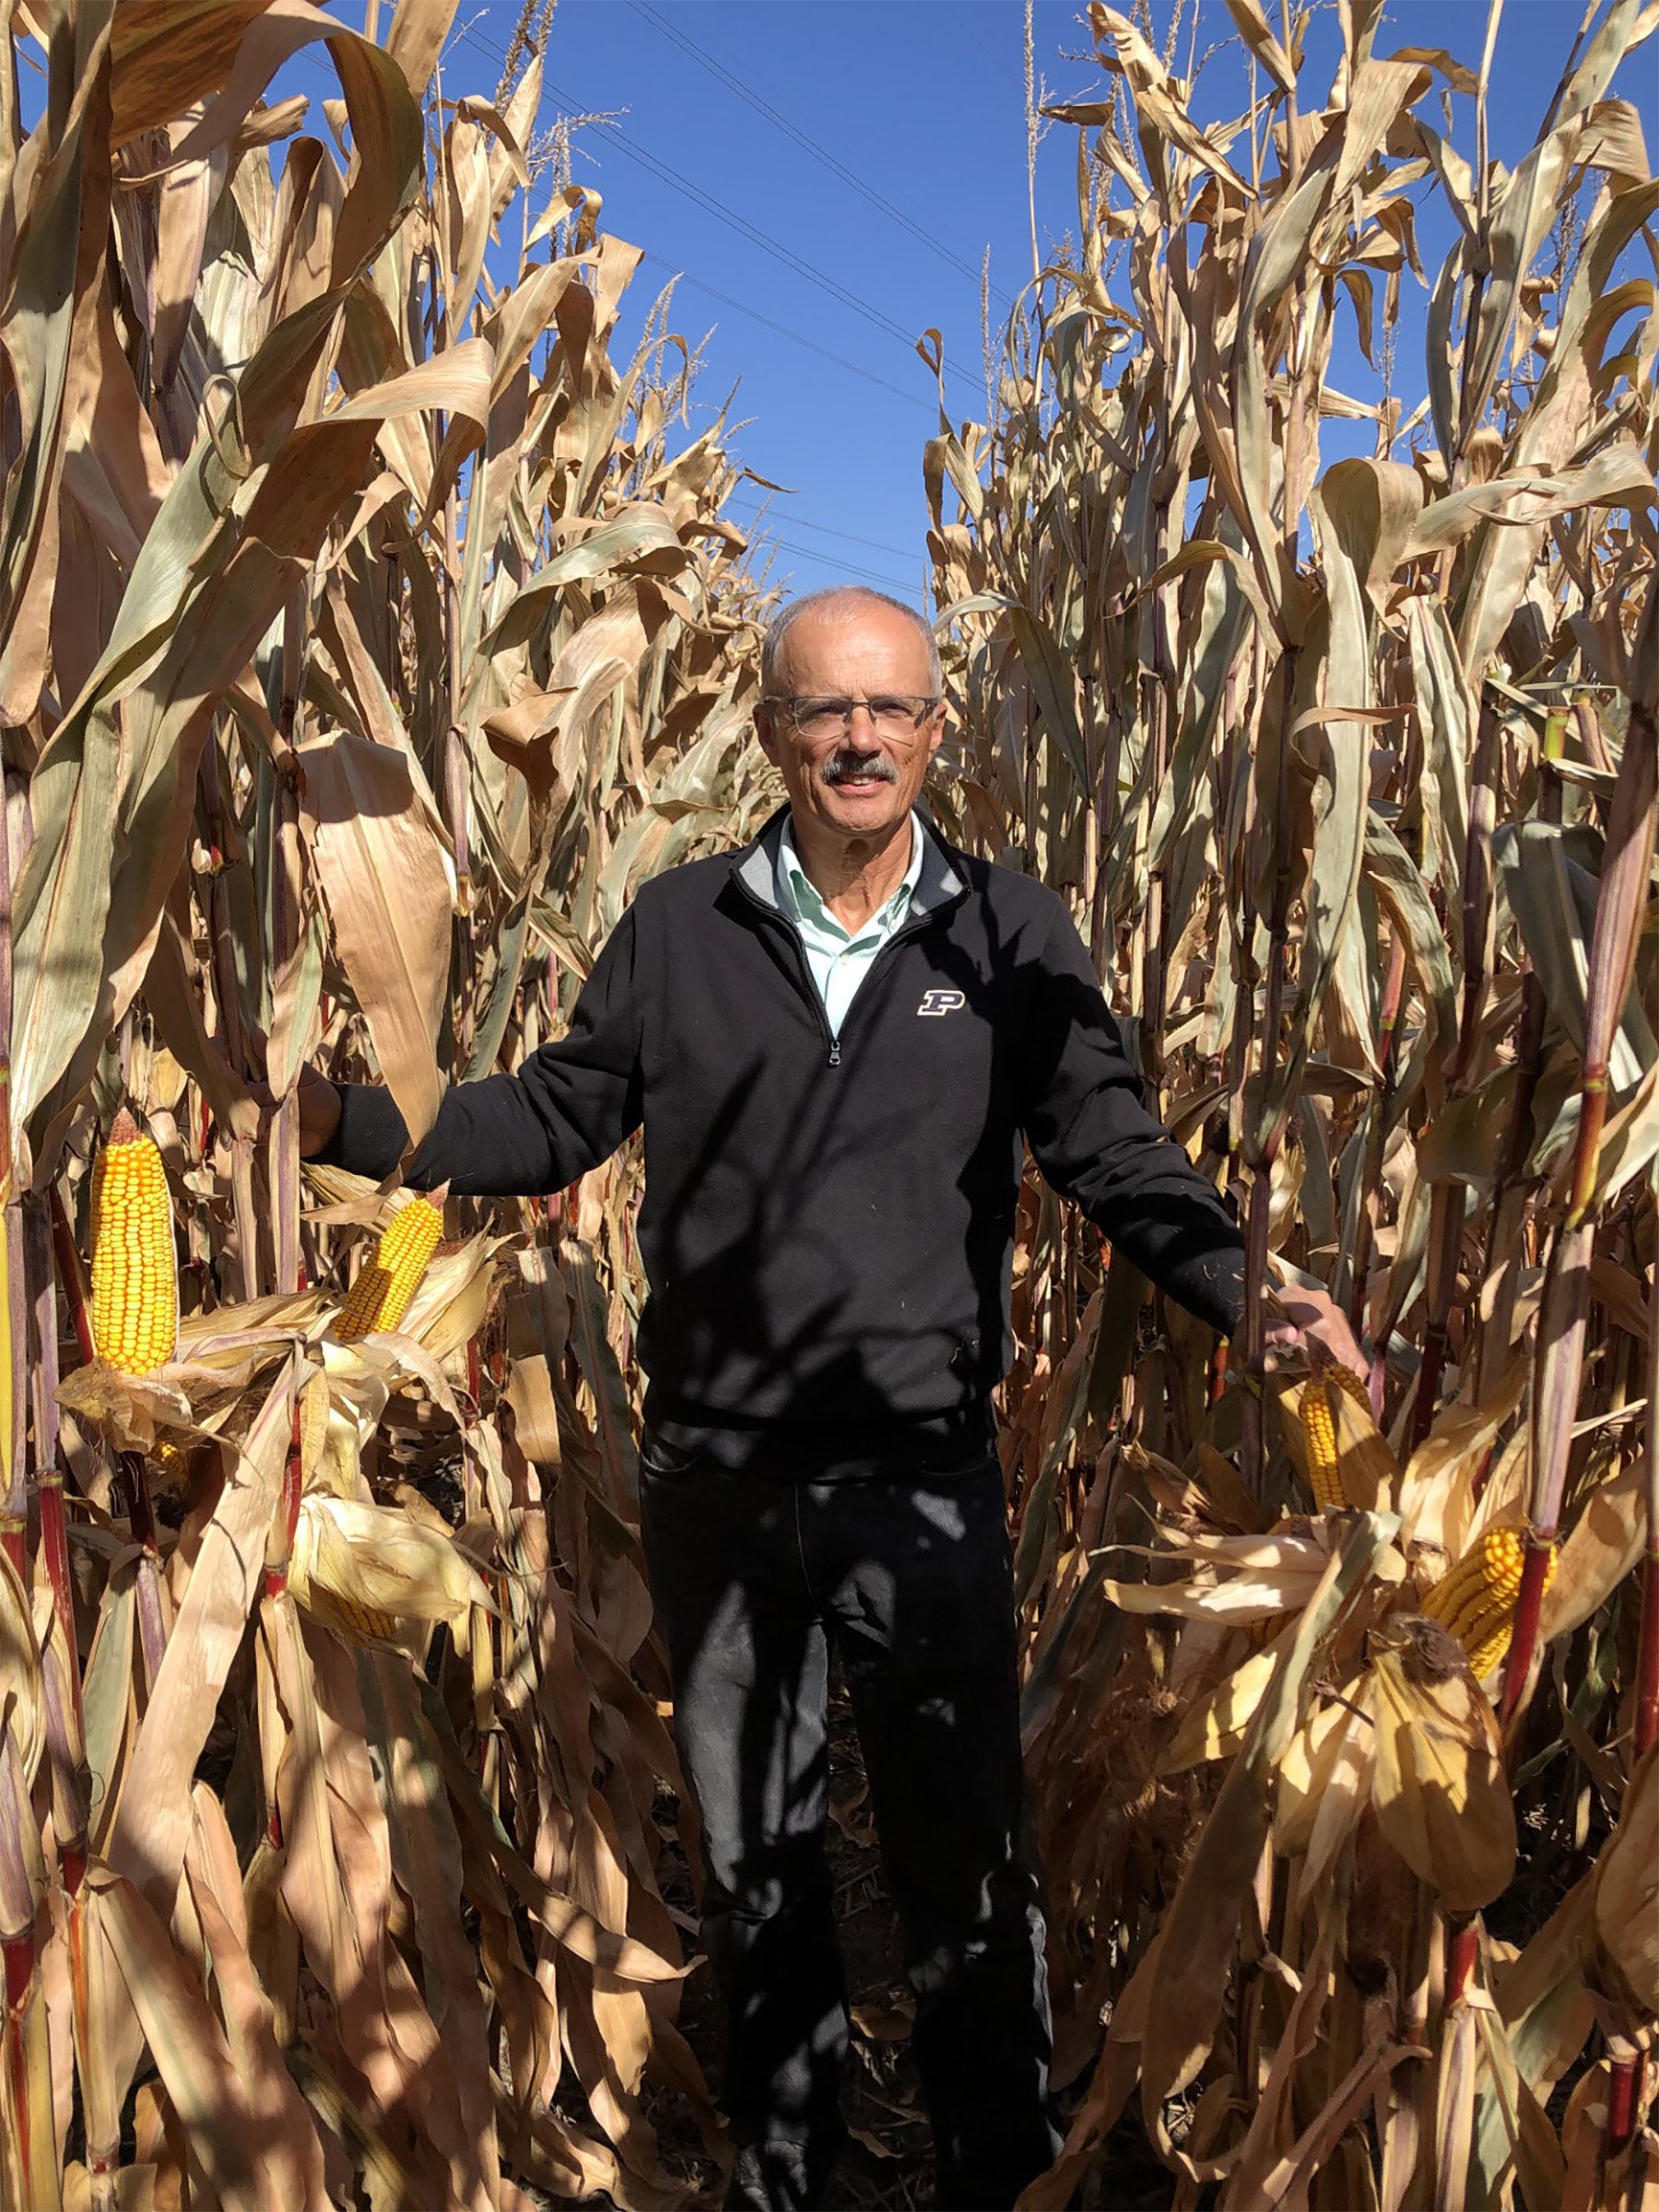 Tony Vyn standing in a dried-down cornfield